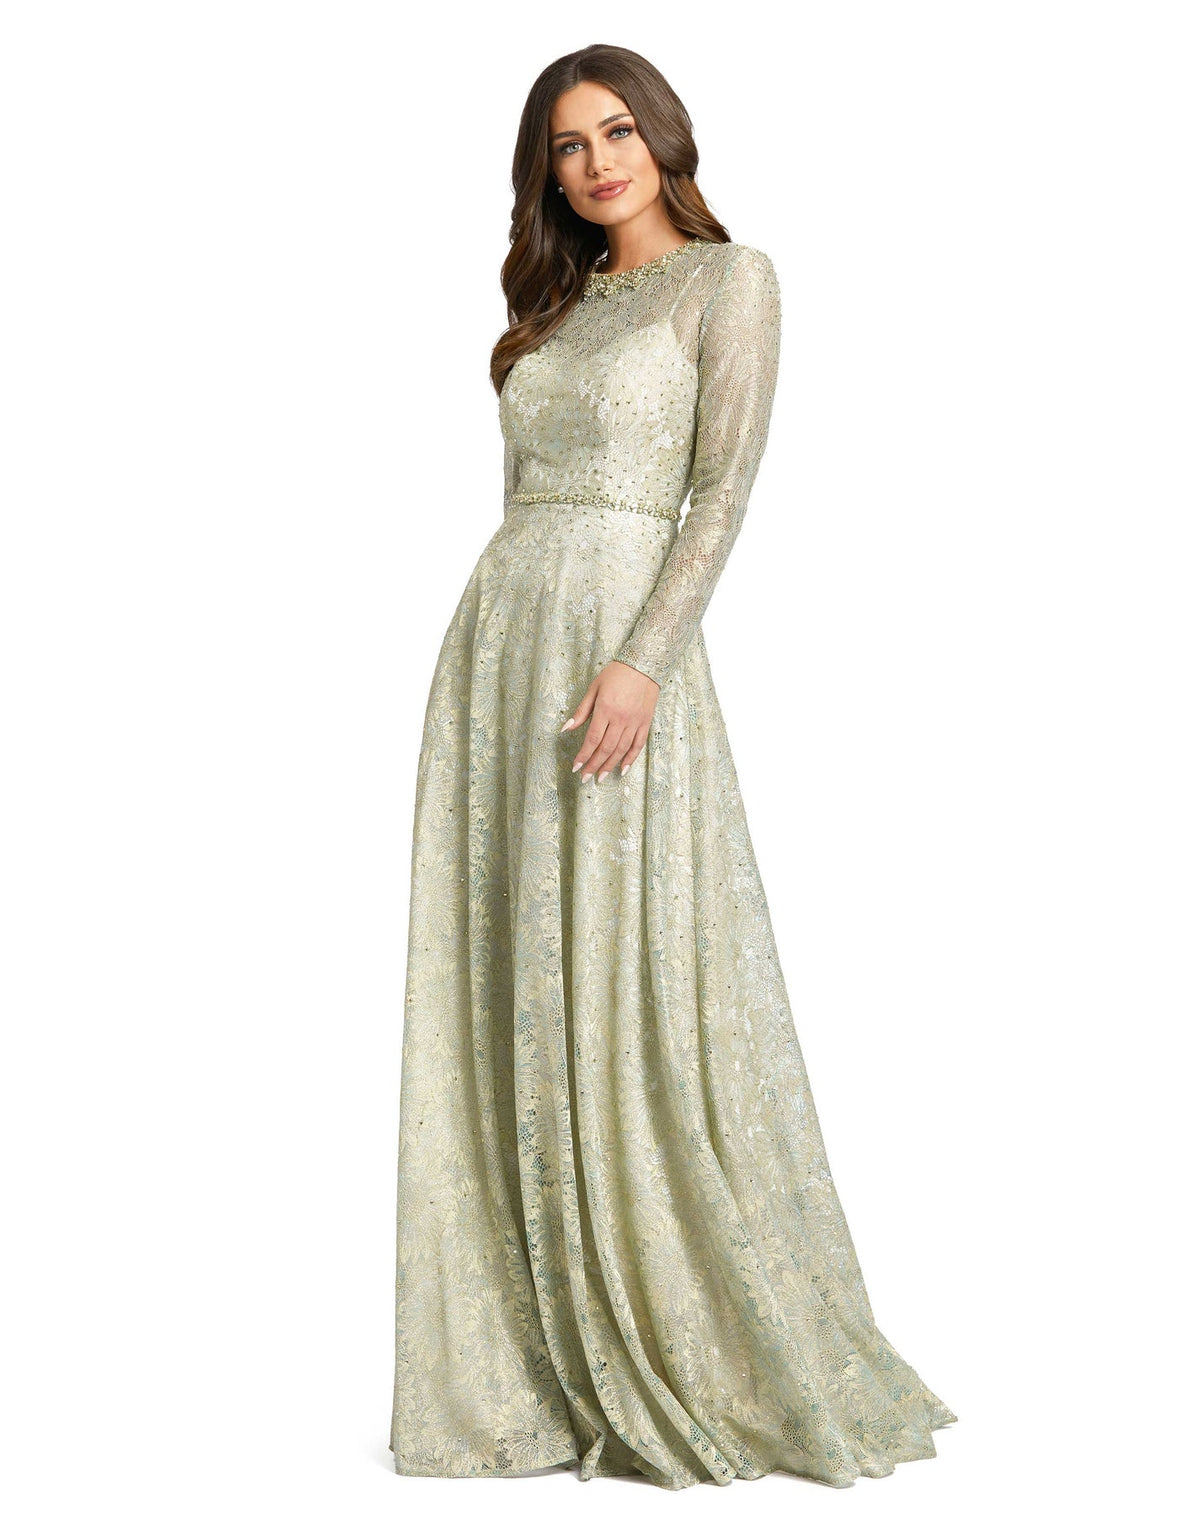 Mac Duggal, LONG SLEEVE FLORAL LAStyle #491881, sage greenCE GOWN, 